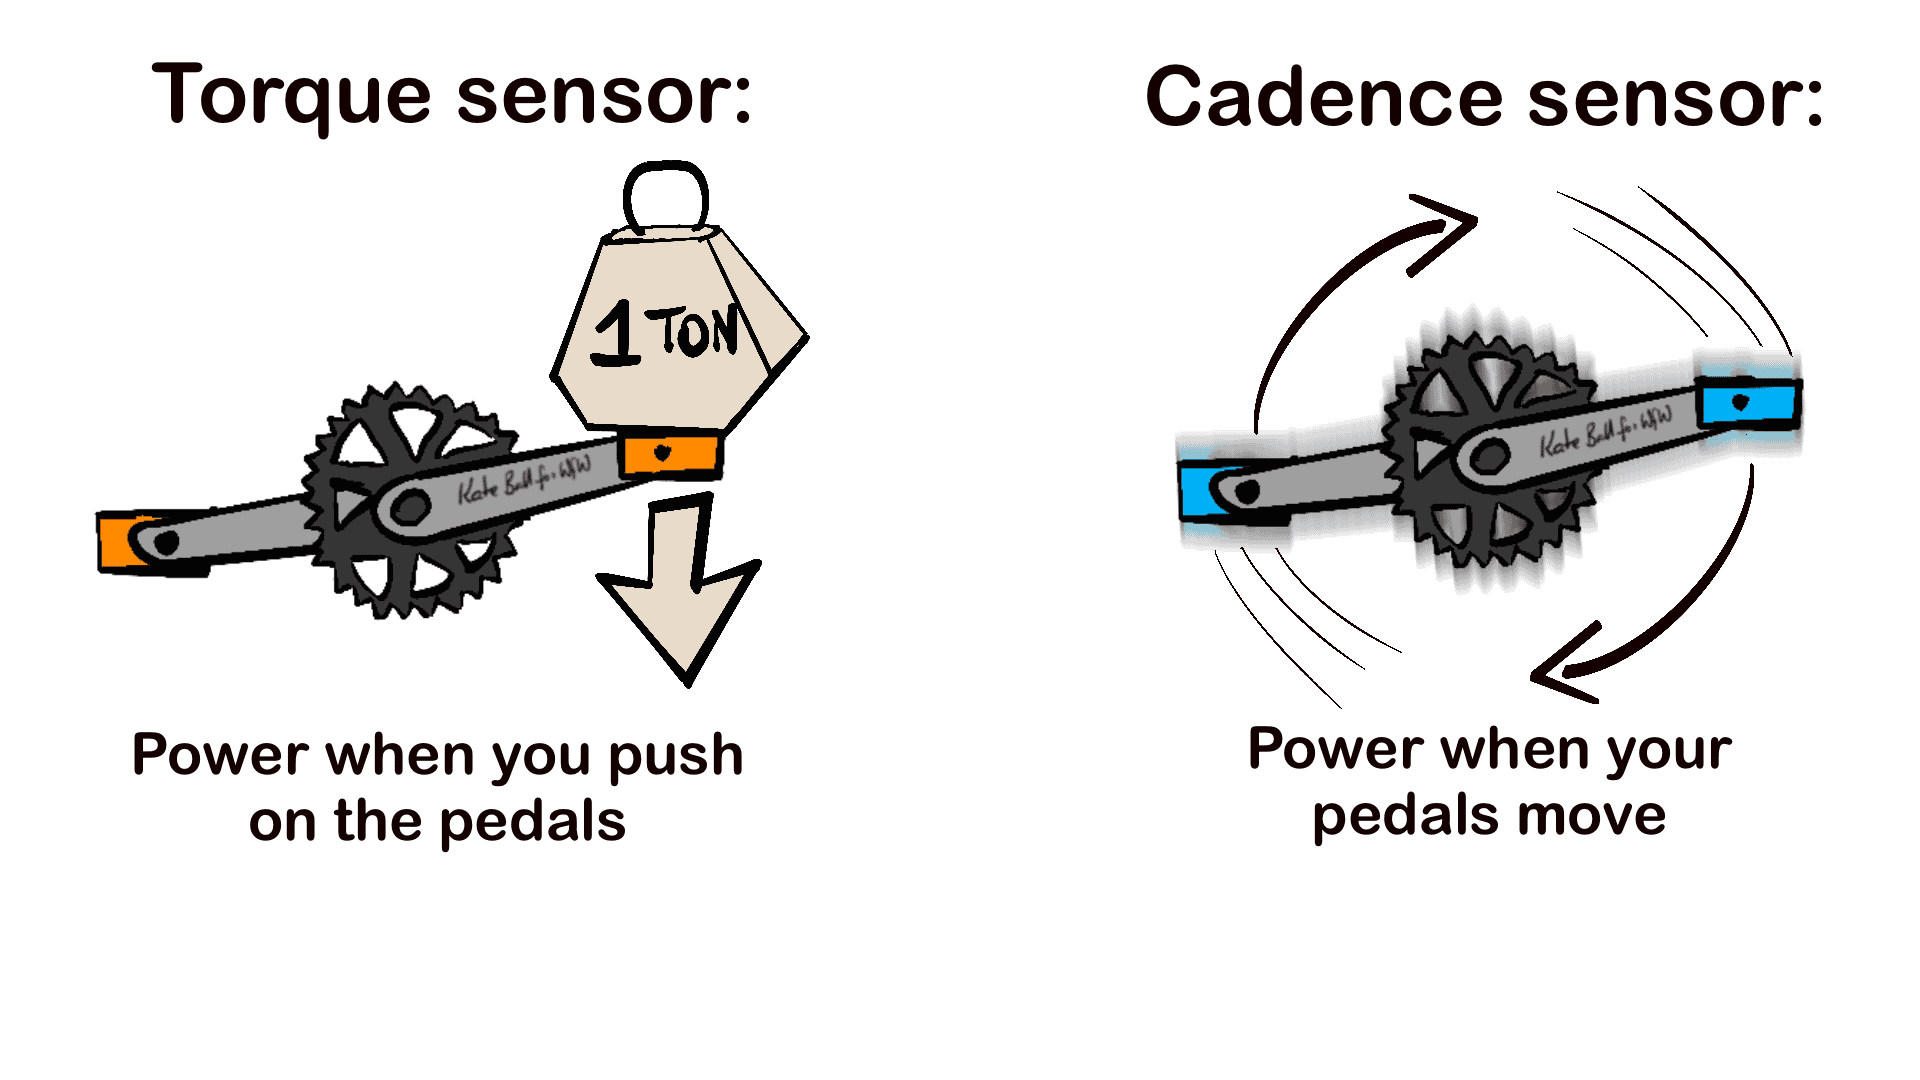 Graphic has two images:
Torque sensor shows a pedal crank with a "1 ton" cartoon weight pushing down the front pedal and has caption "power when you push on the pedals".
Cadence sensor shows pedal cranks blurred and spinning and has caption "power when your pedals move".